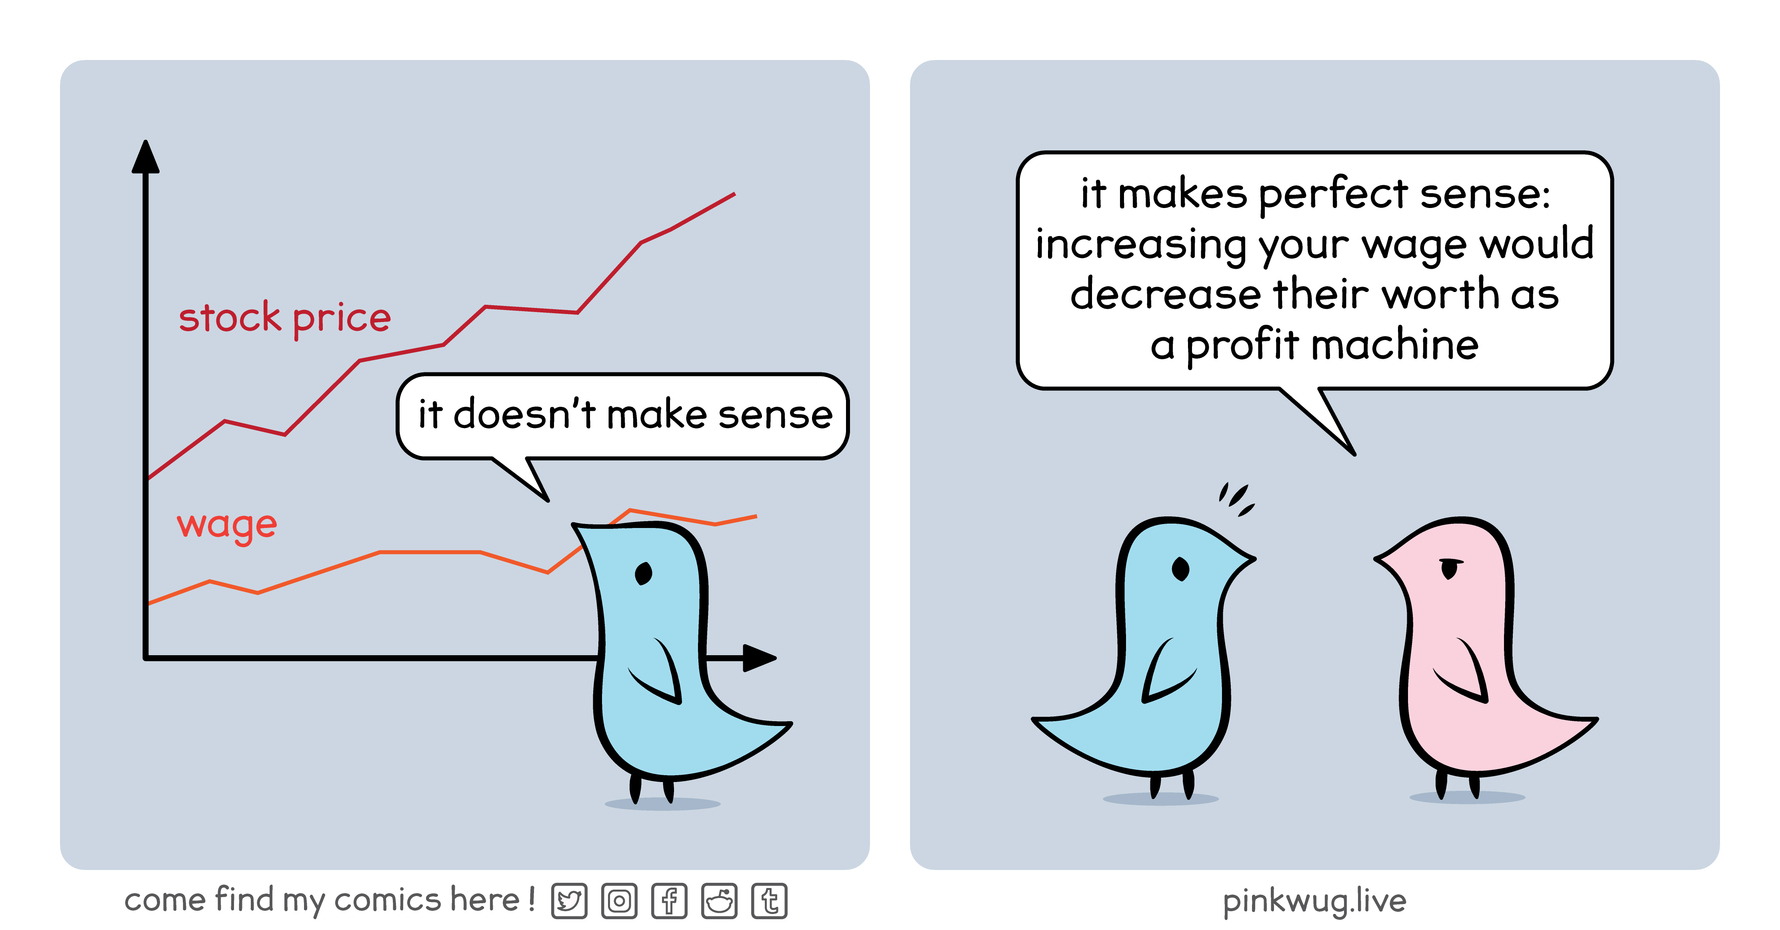 pinkwug comic: Graph in background shows stock price line increasing faster than wage line

Bluewug says "it doesn't make sense"

pinkwug says "it makes perfect sense: increase your wage would decrease their worth as a profit machine"